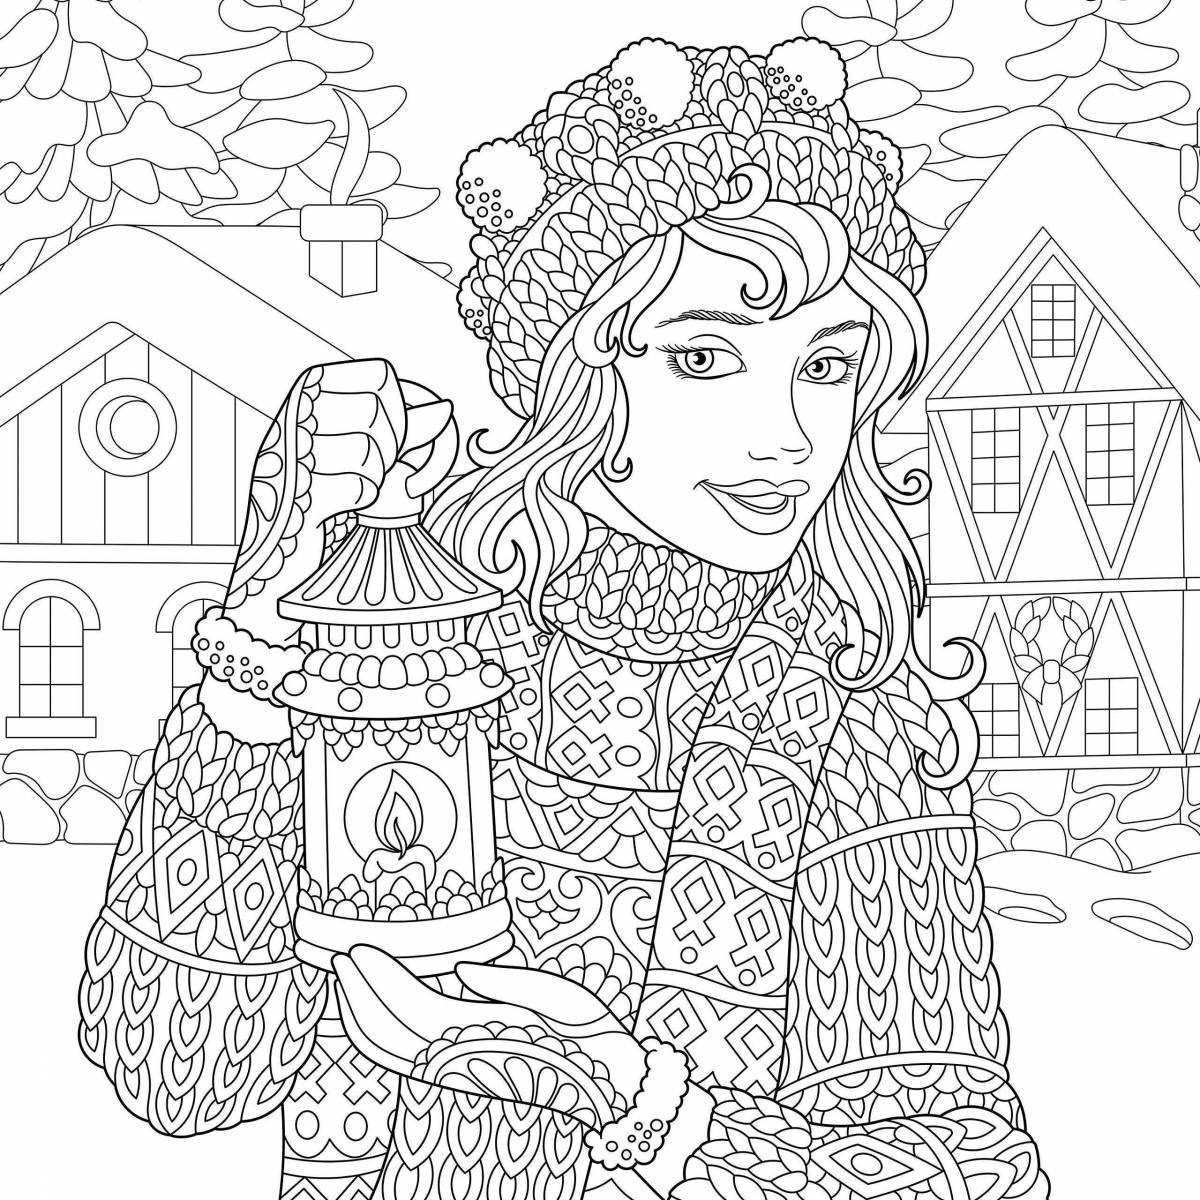 Refreshing anti-stress coloring book for girls 10-12 years old